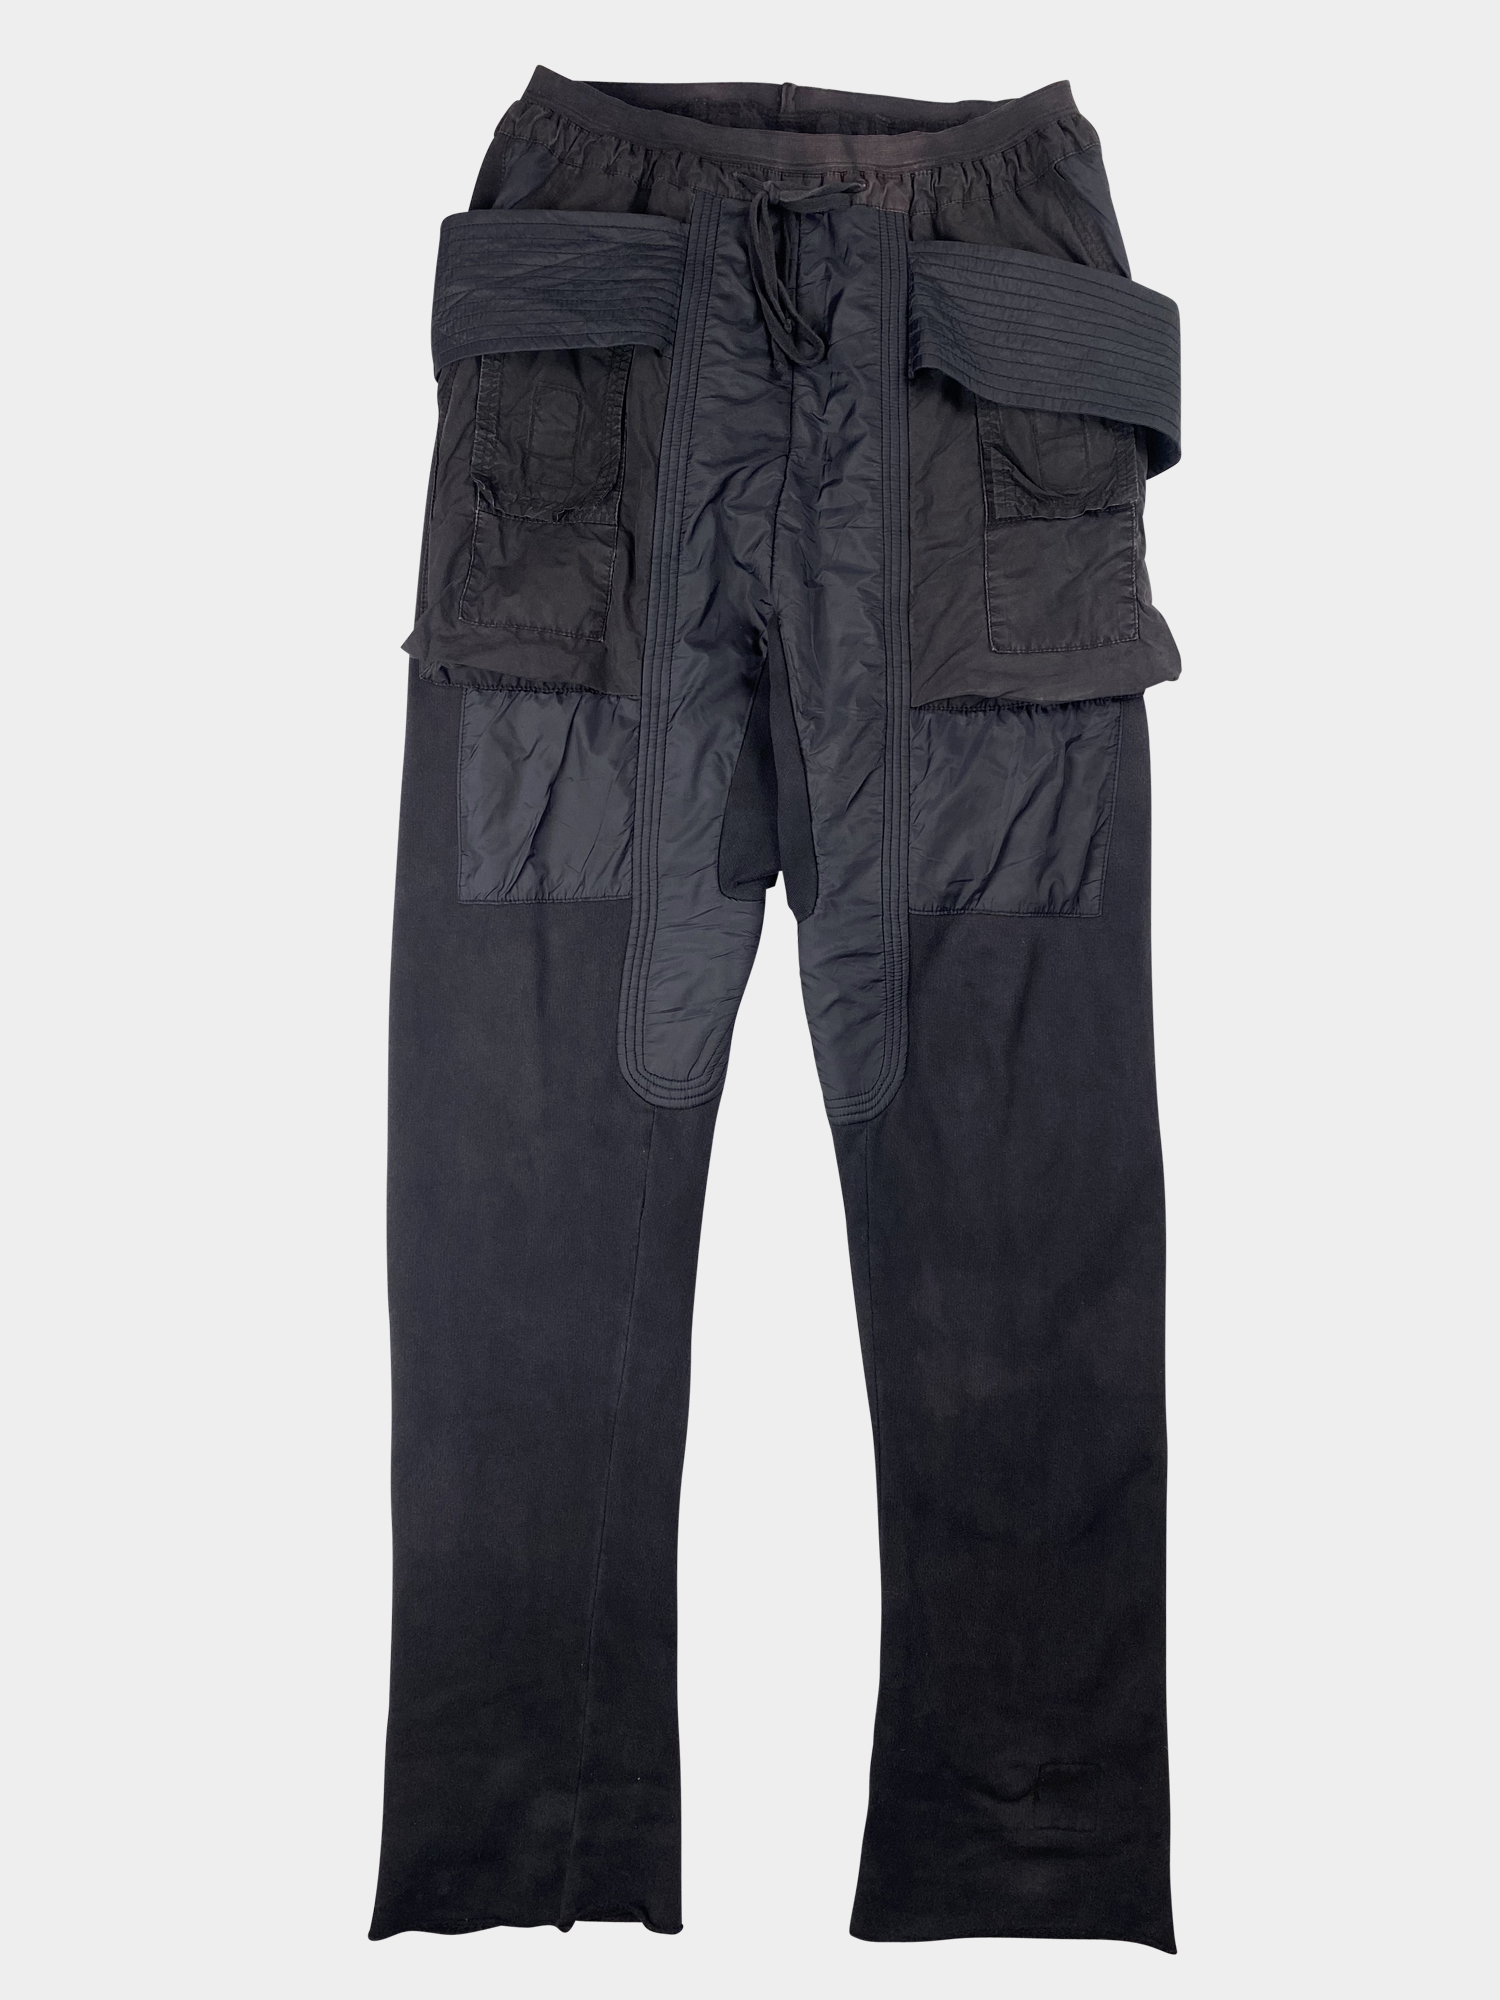 RICK OWENS Creatch Cargo Pants - ARCHIVED